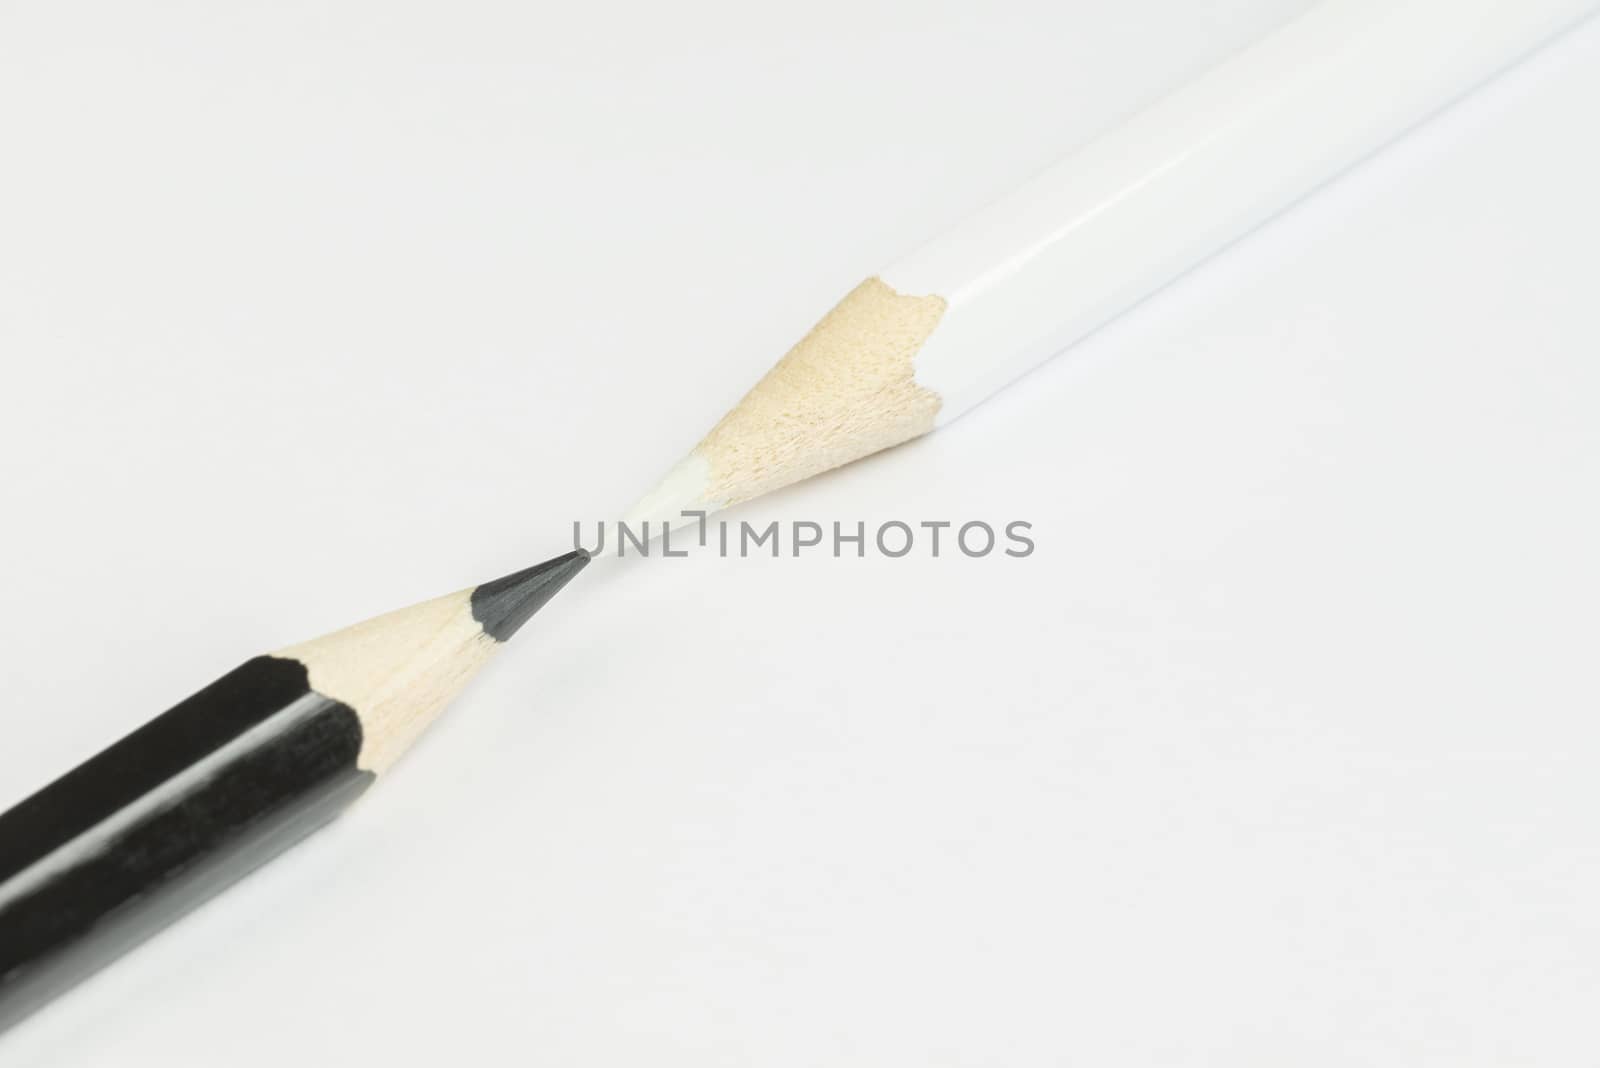 Black and white pencil as conceptual imagination of opposites
